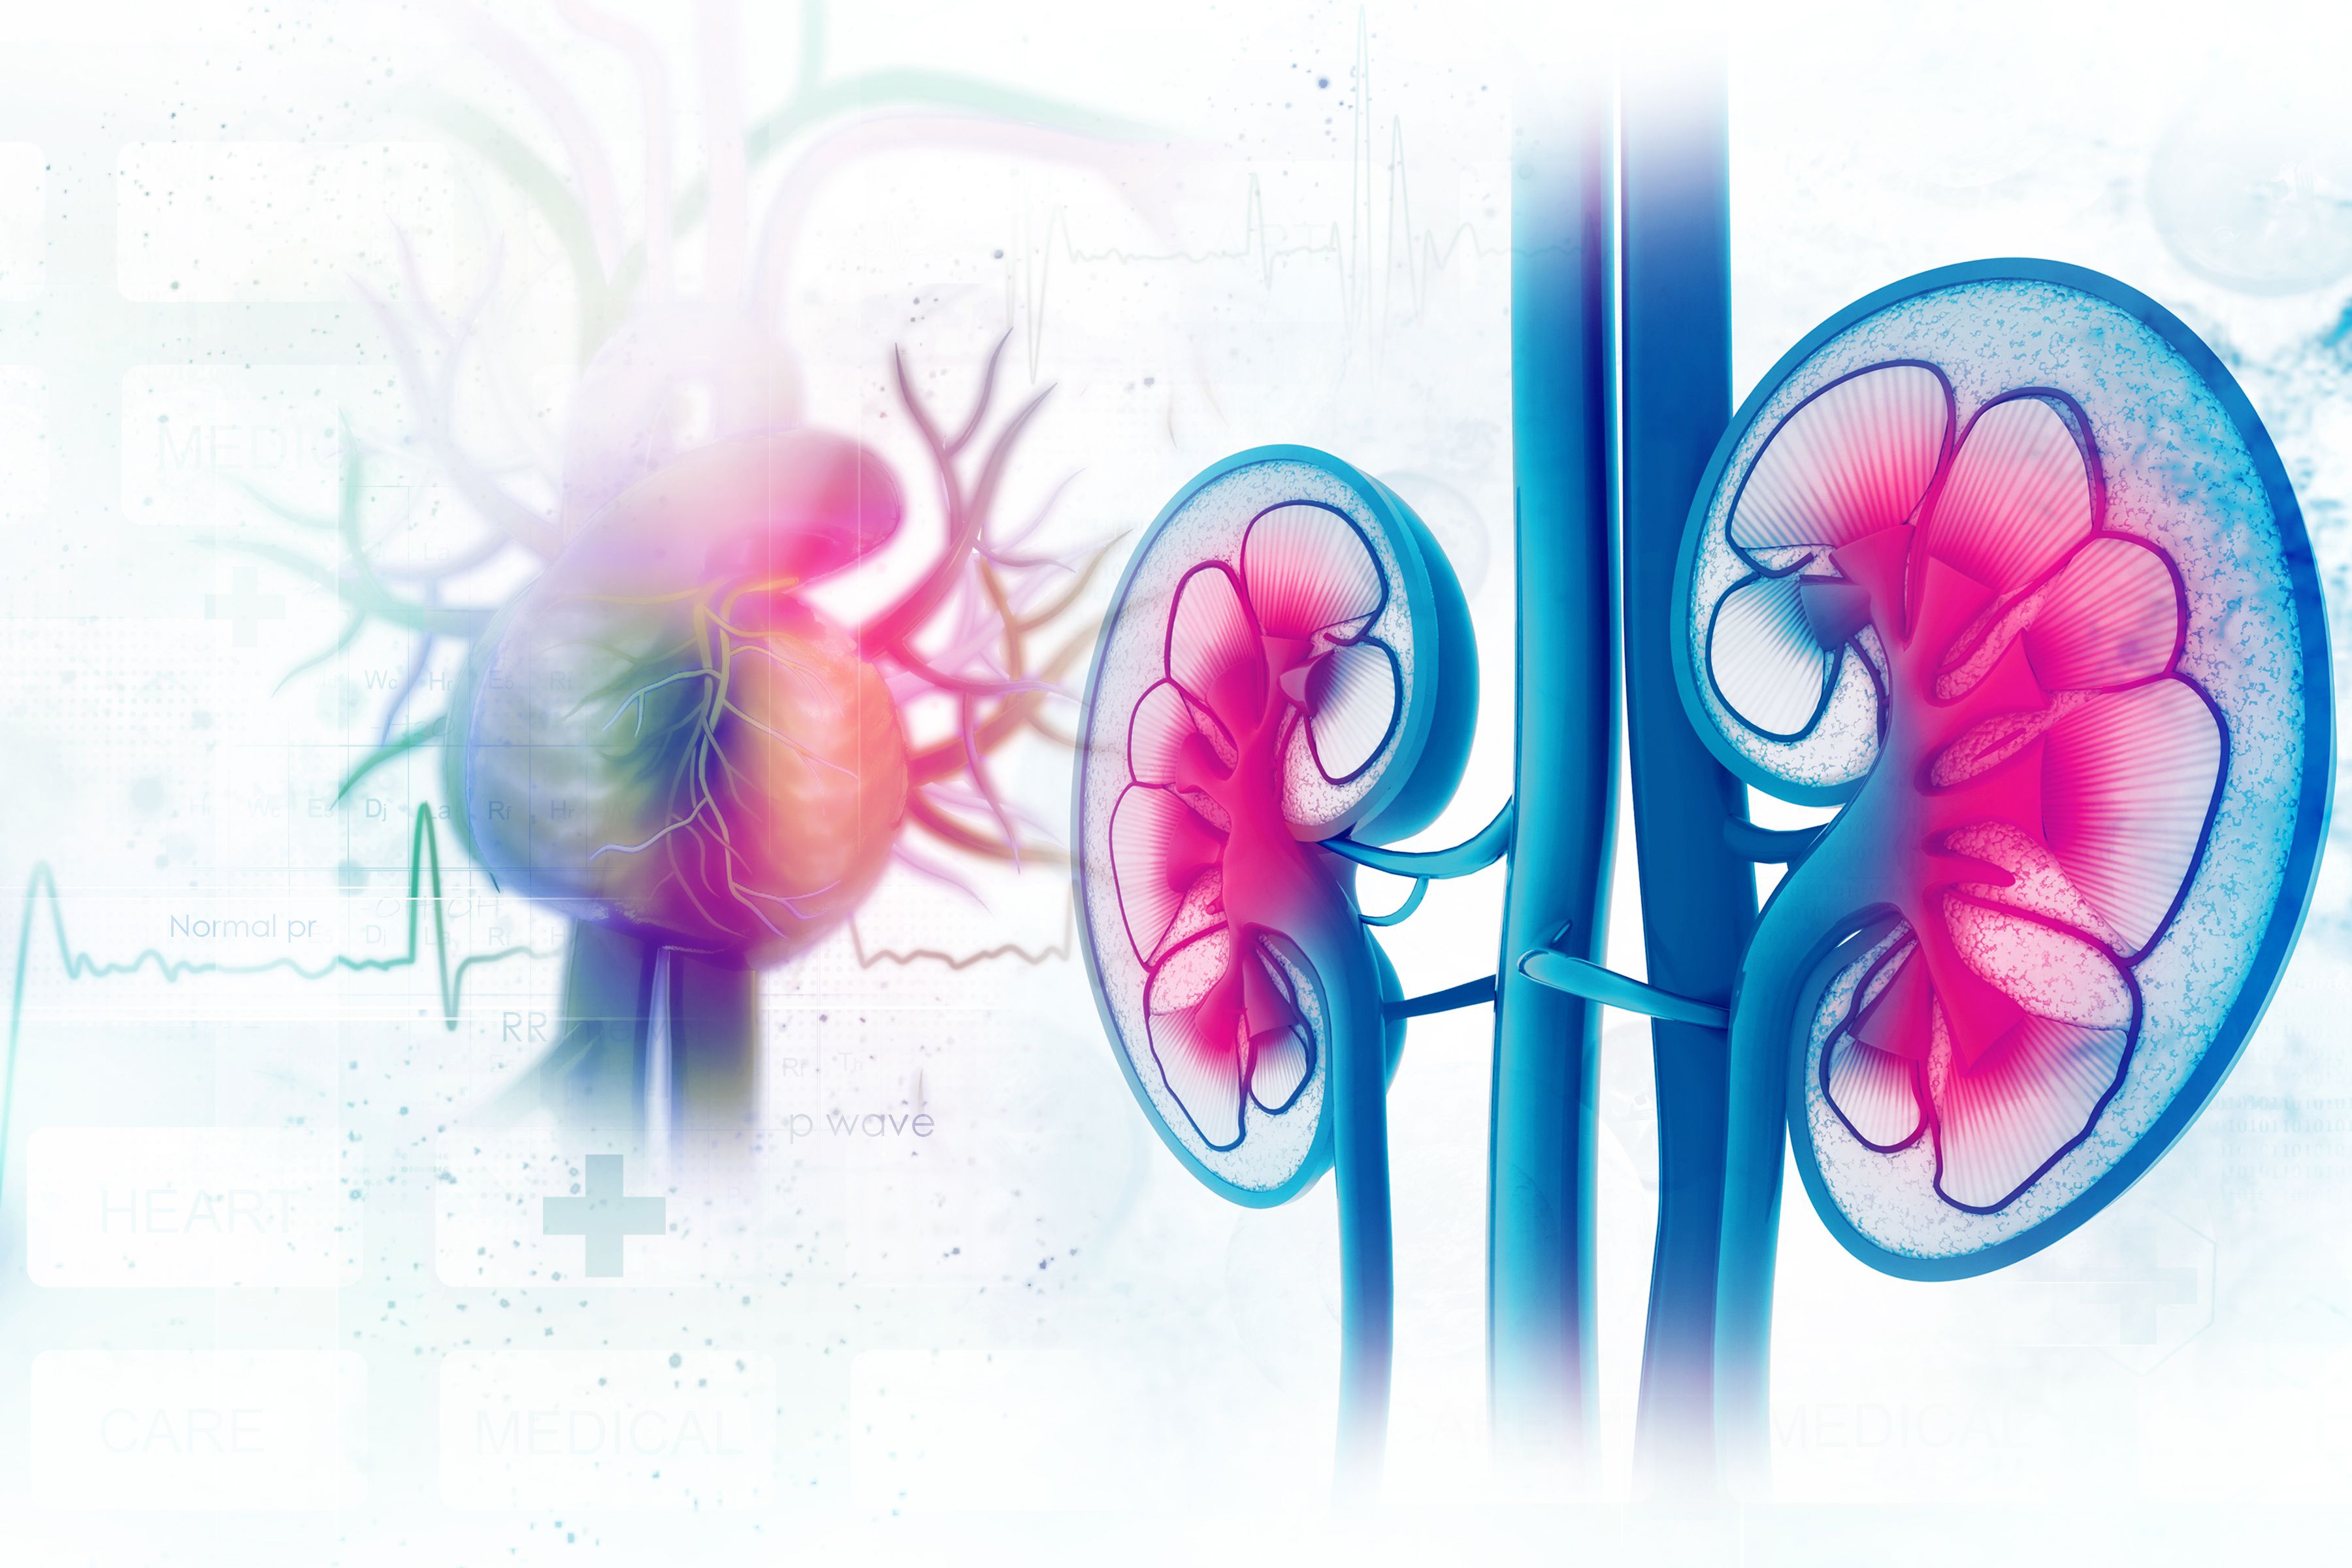 ICD Implantation Associated With Lower Risk of Mortality in Patients With CKD